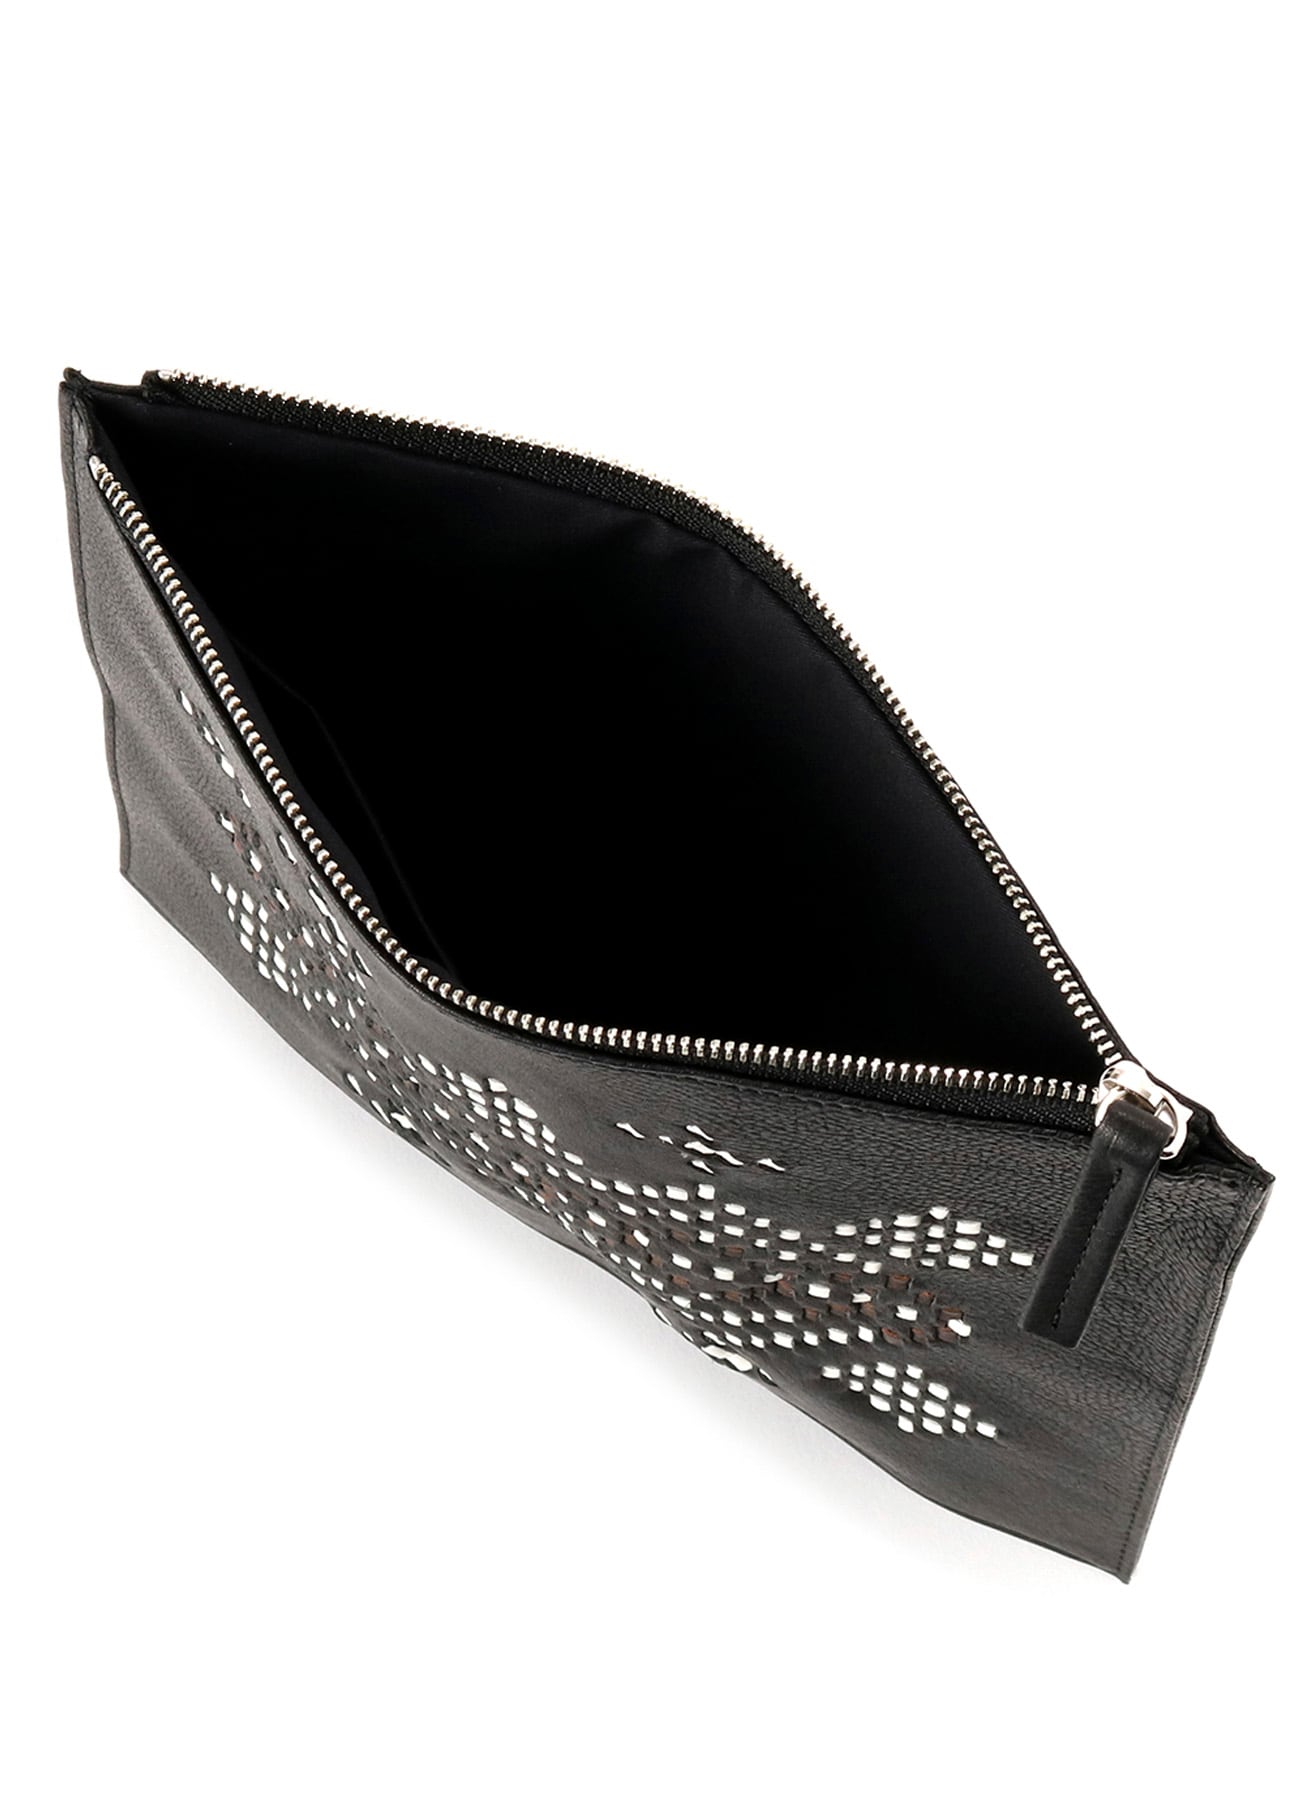 Shining oil leather stitch pouch(FREE SIZE White x Black): Vintage 